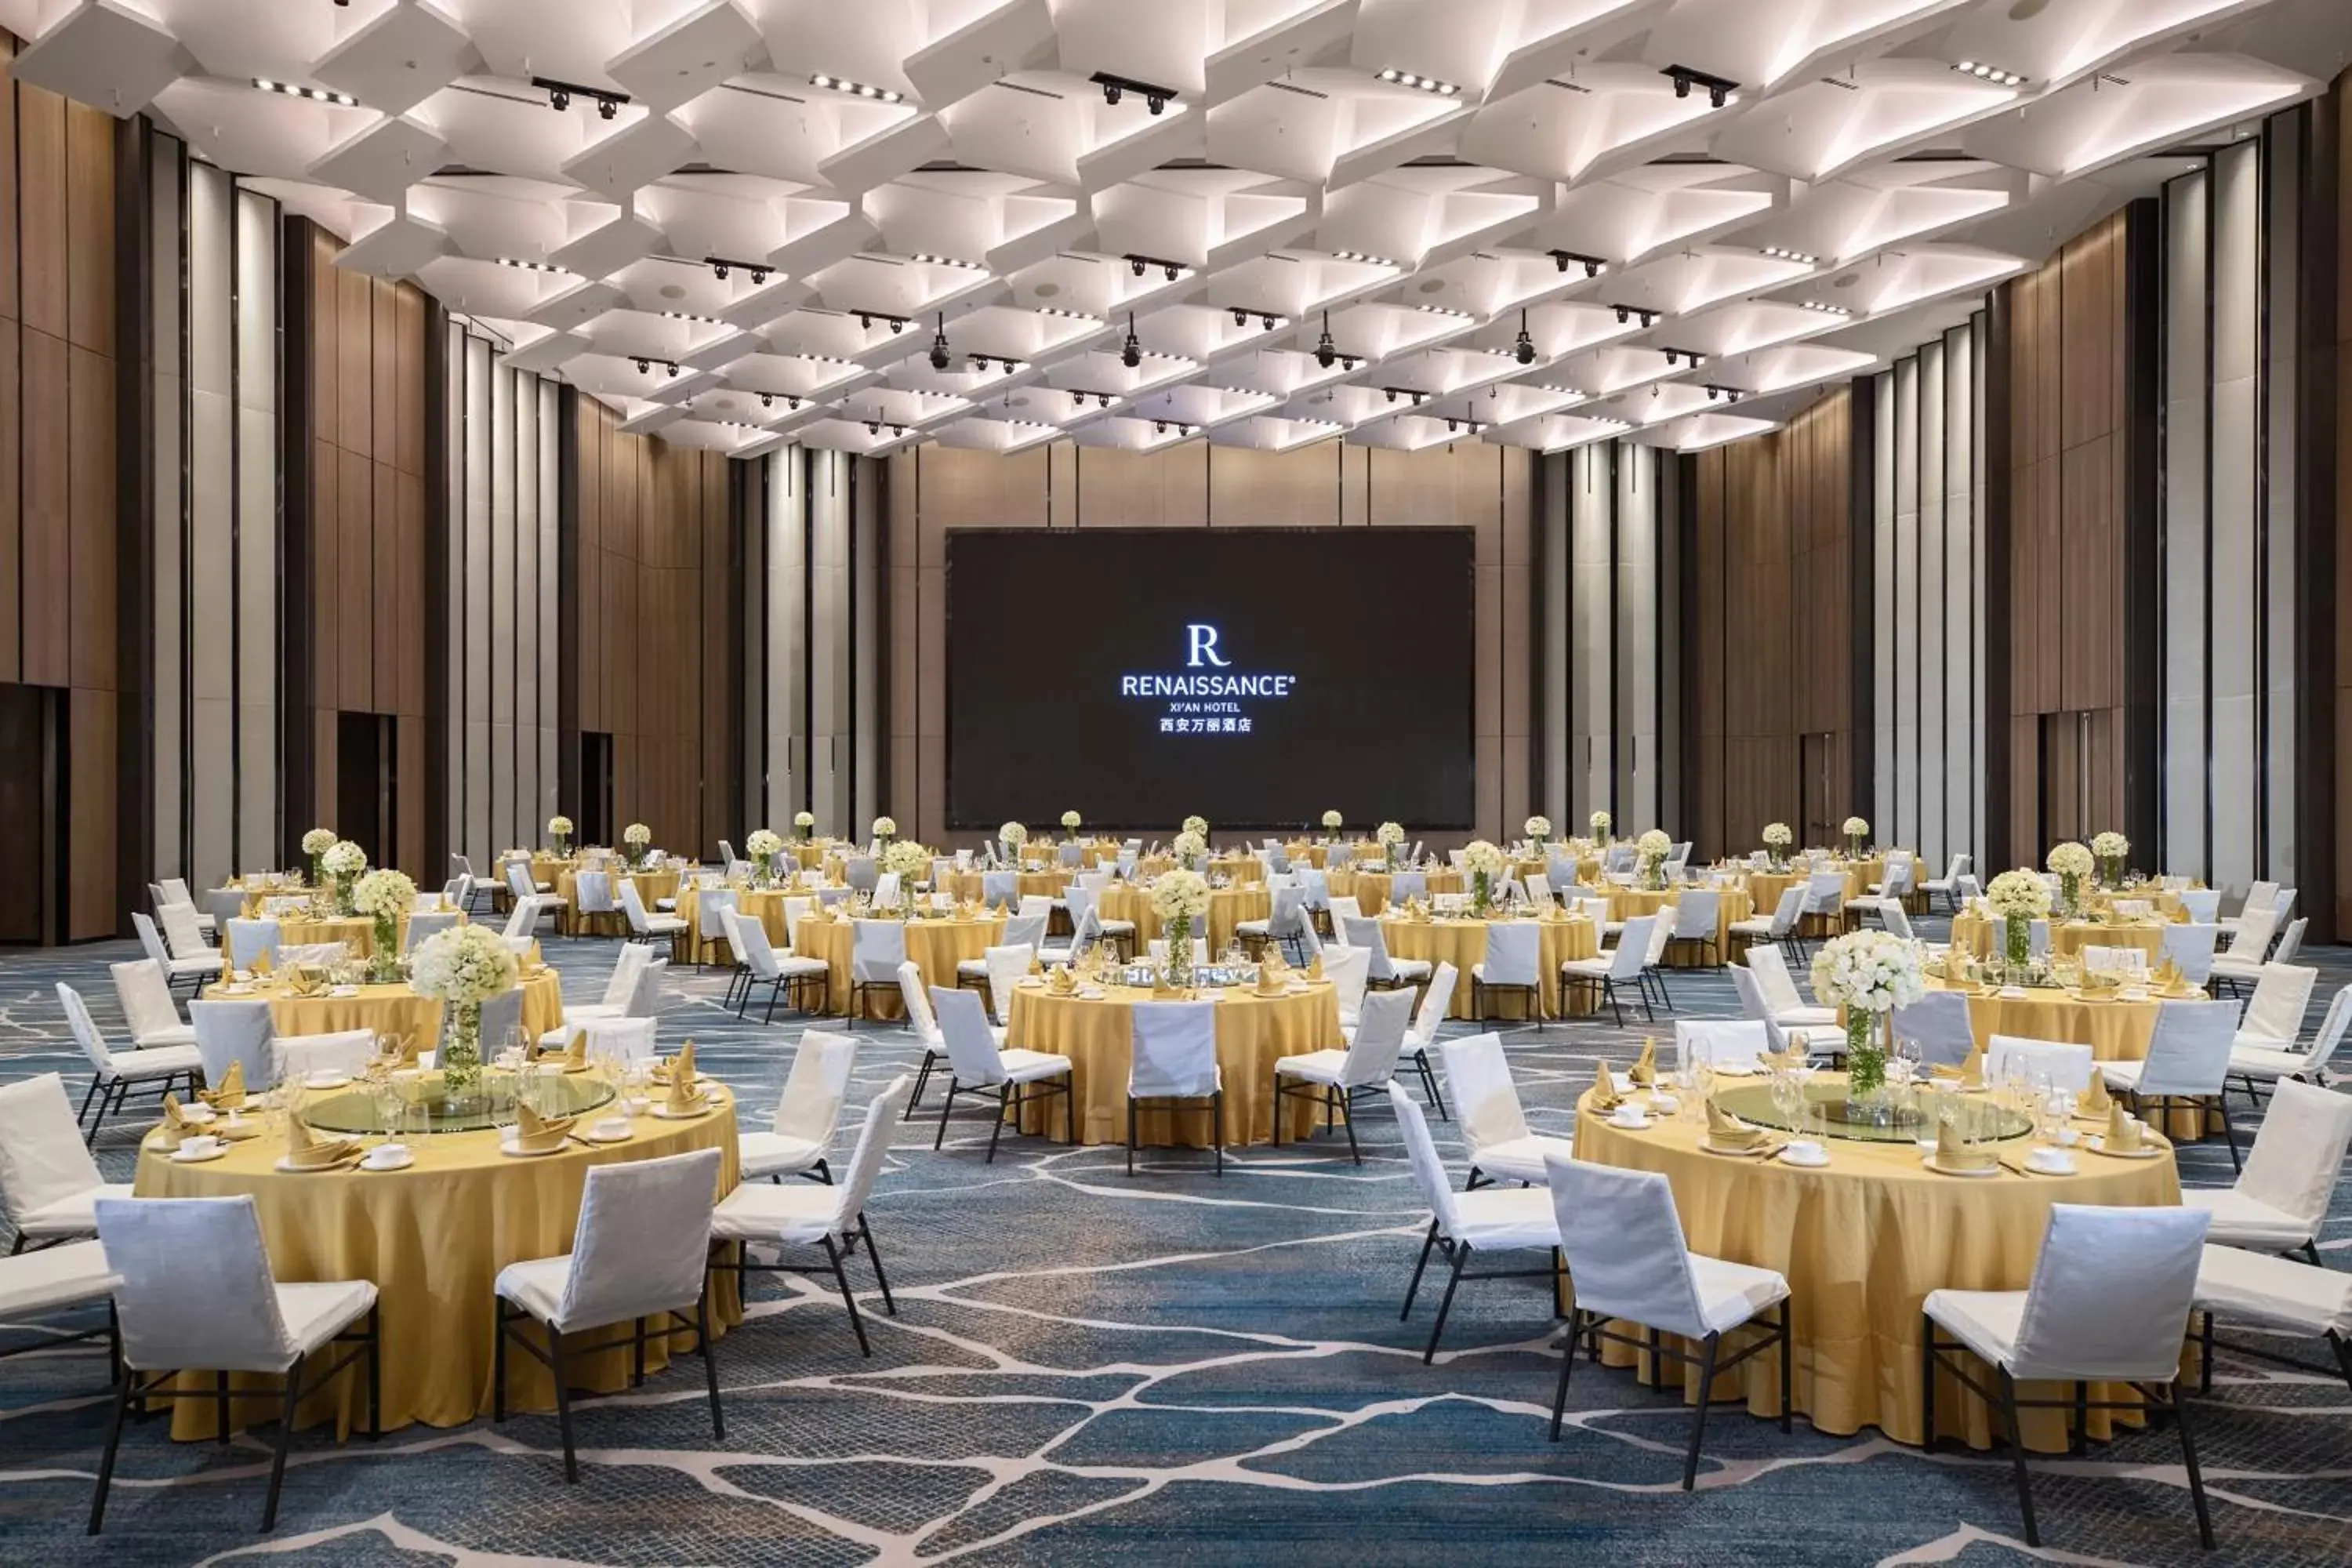 Meeting/conference room, Banquet Facilities in Renaissance Xi'an Hotel